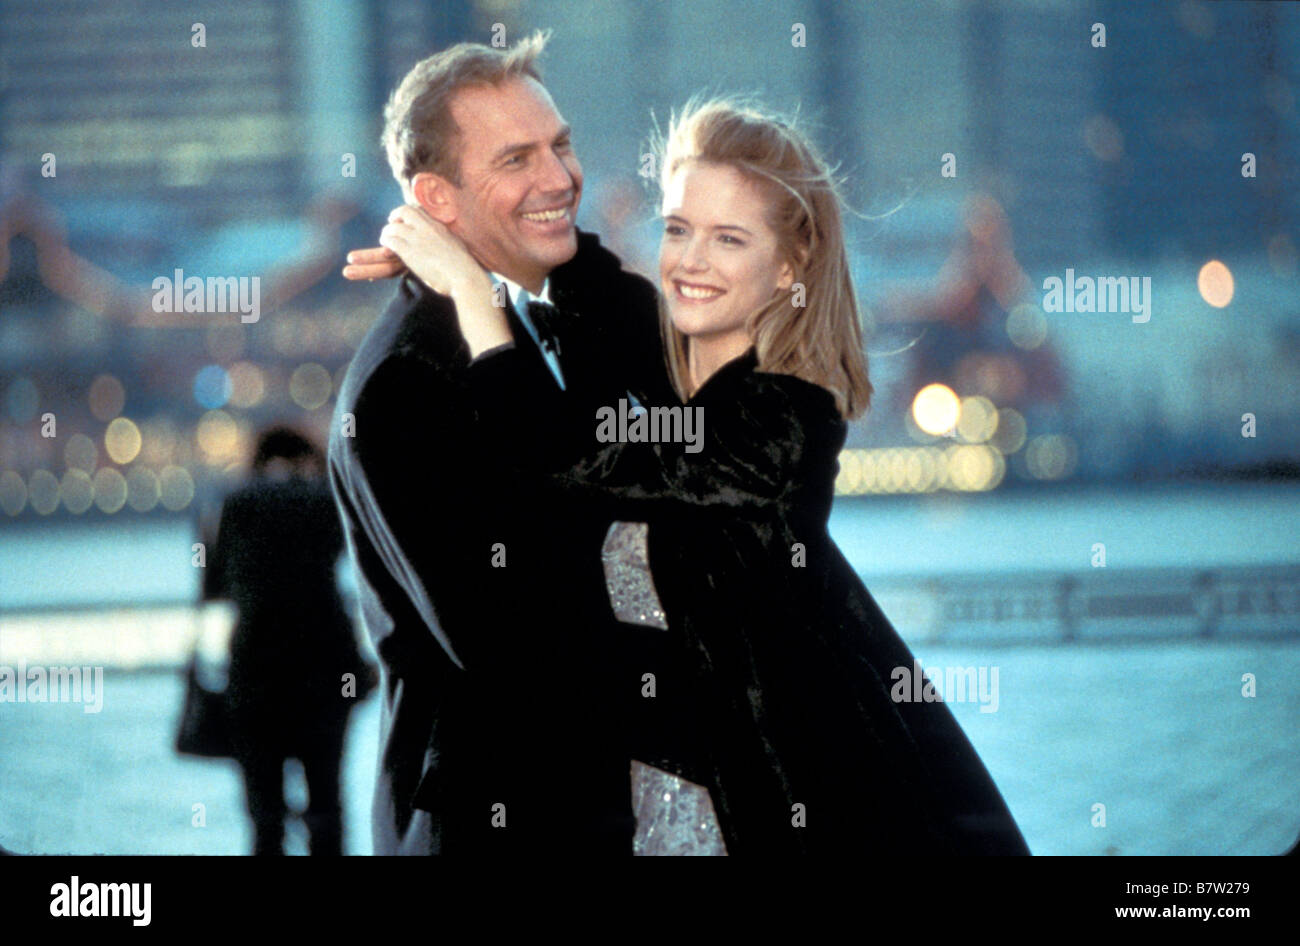 https://c8.alamy.com/comp/B7W279/for-love-of-the-game-year-1999-usa-kevin-costner-kelly-preston-director-B7W279.jpg